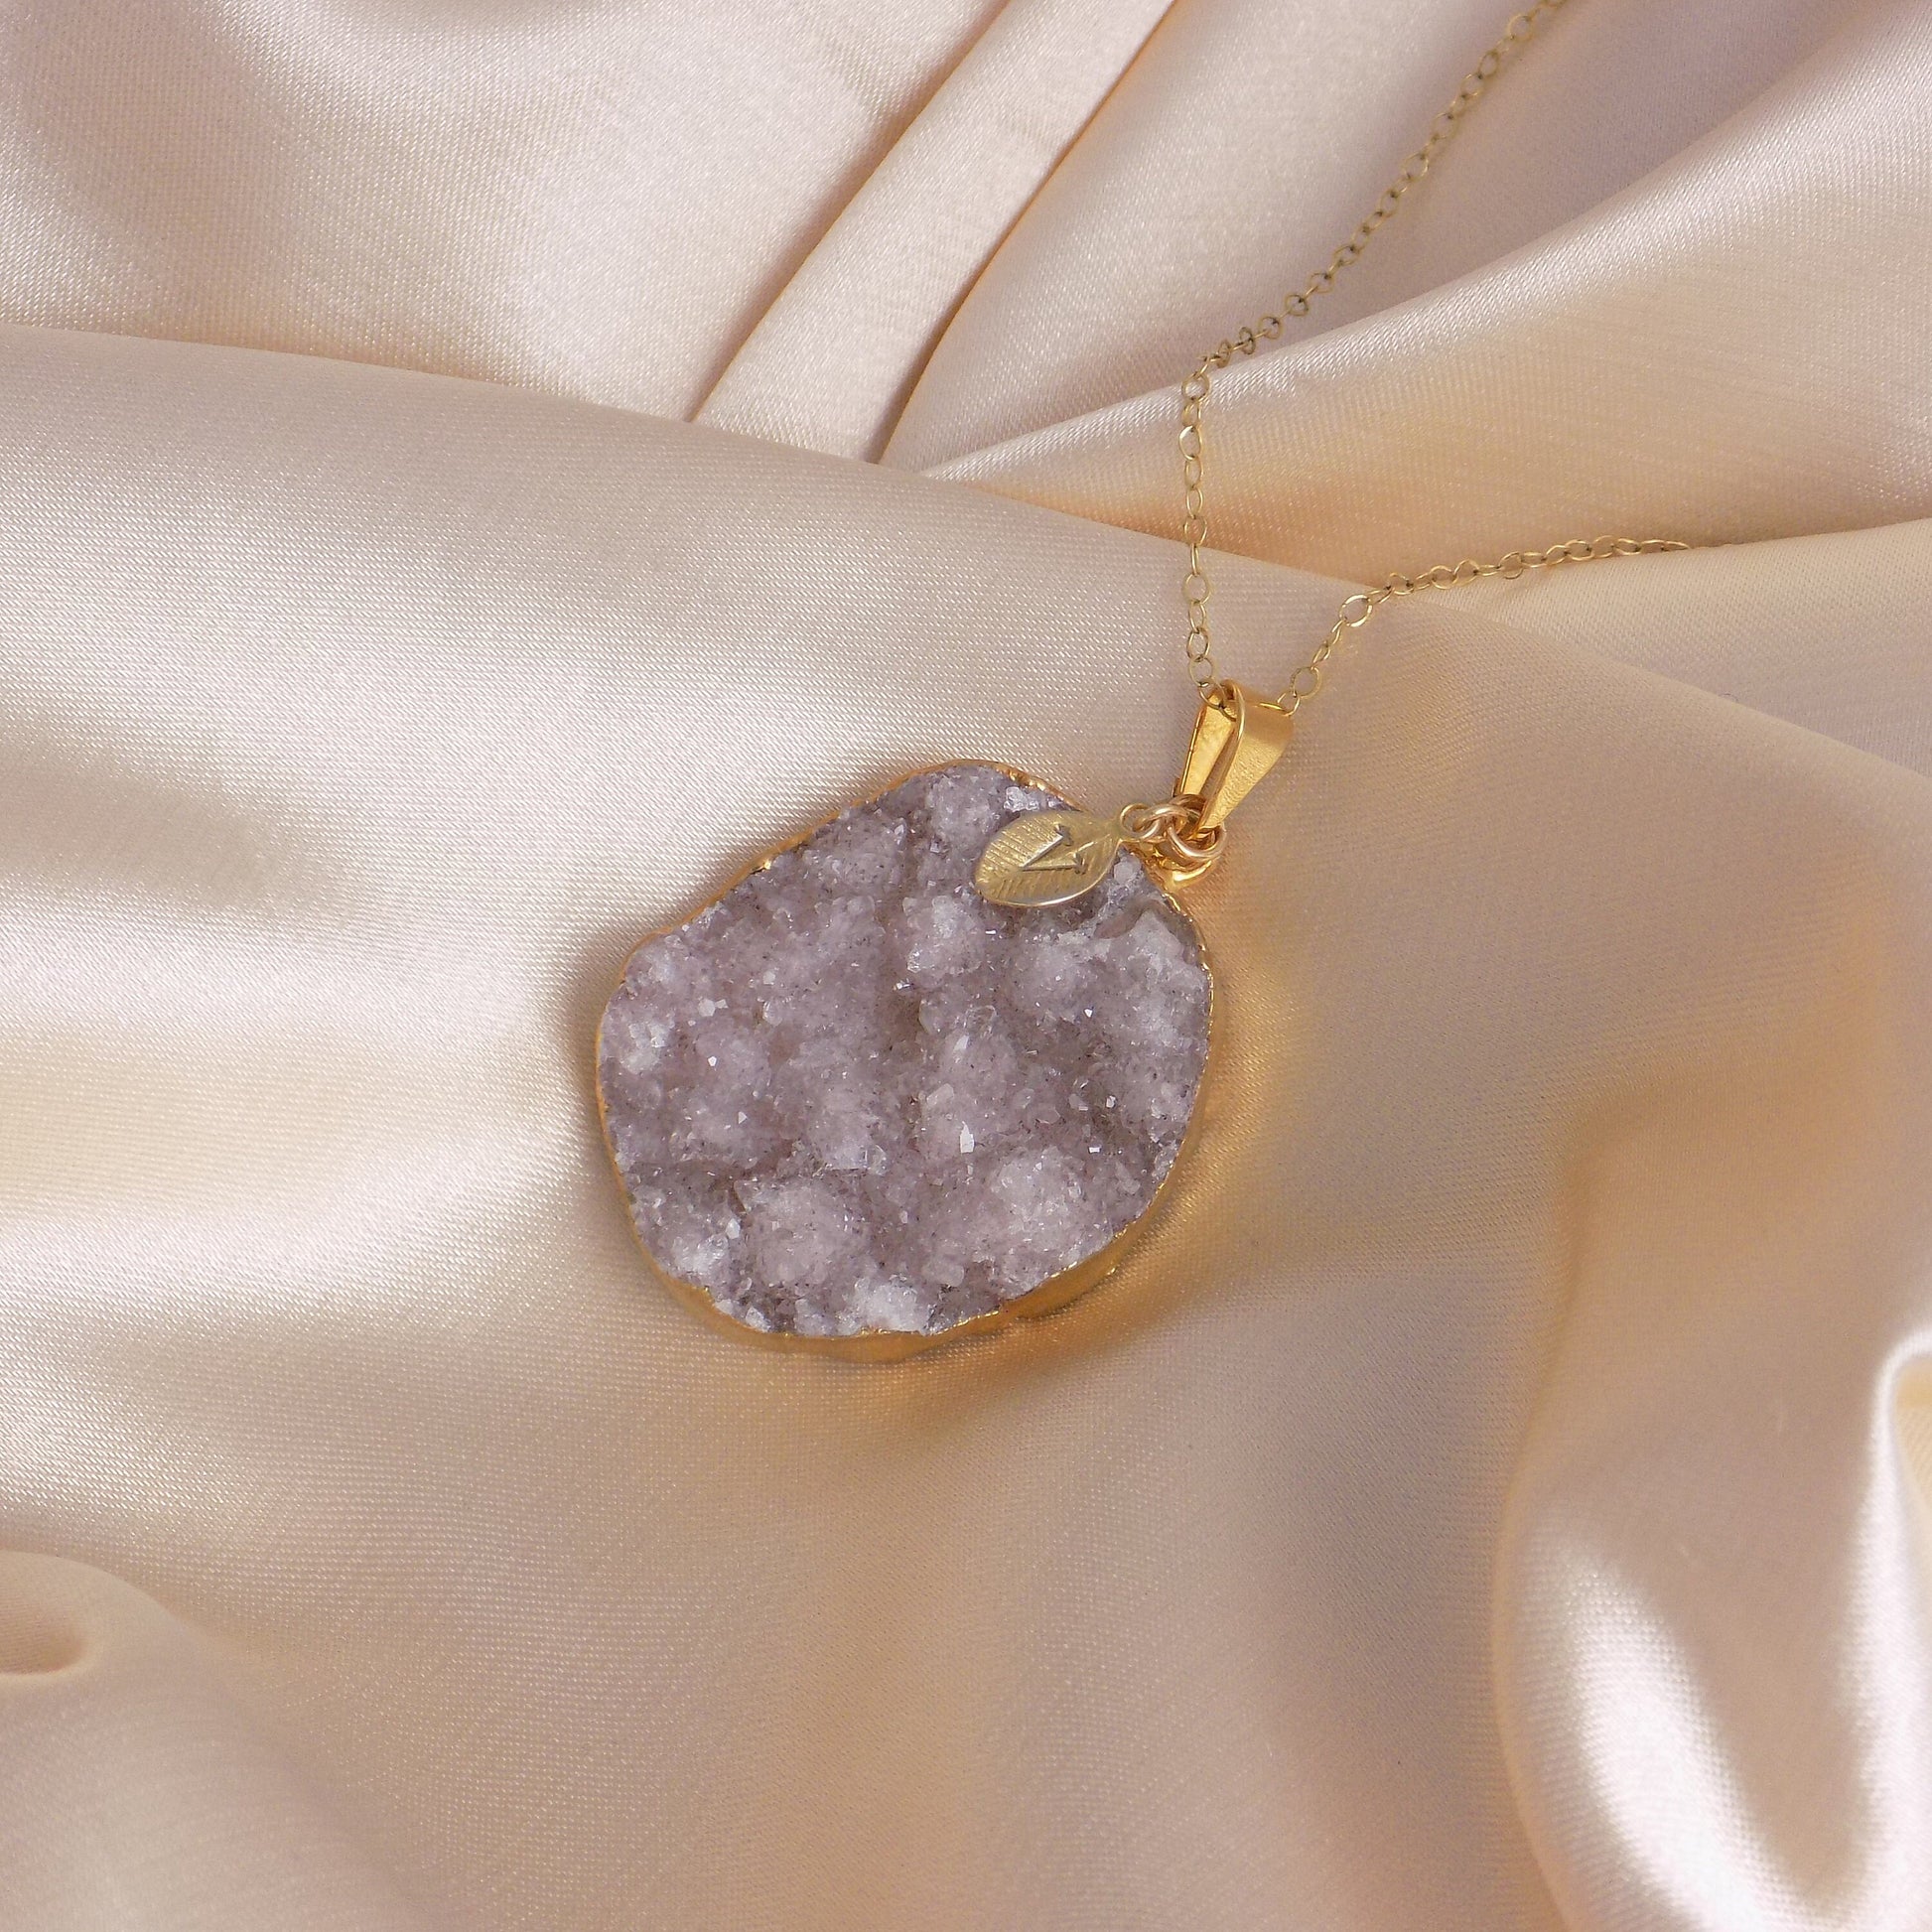 Unique Amethyst Druzy Necklace Gold with Initial Charm, Gift For Mom, G15-208